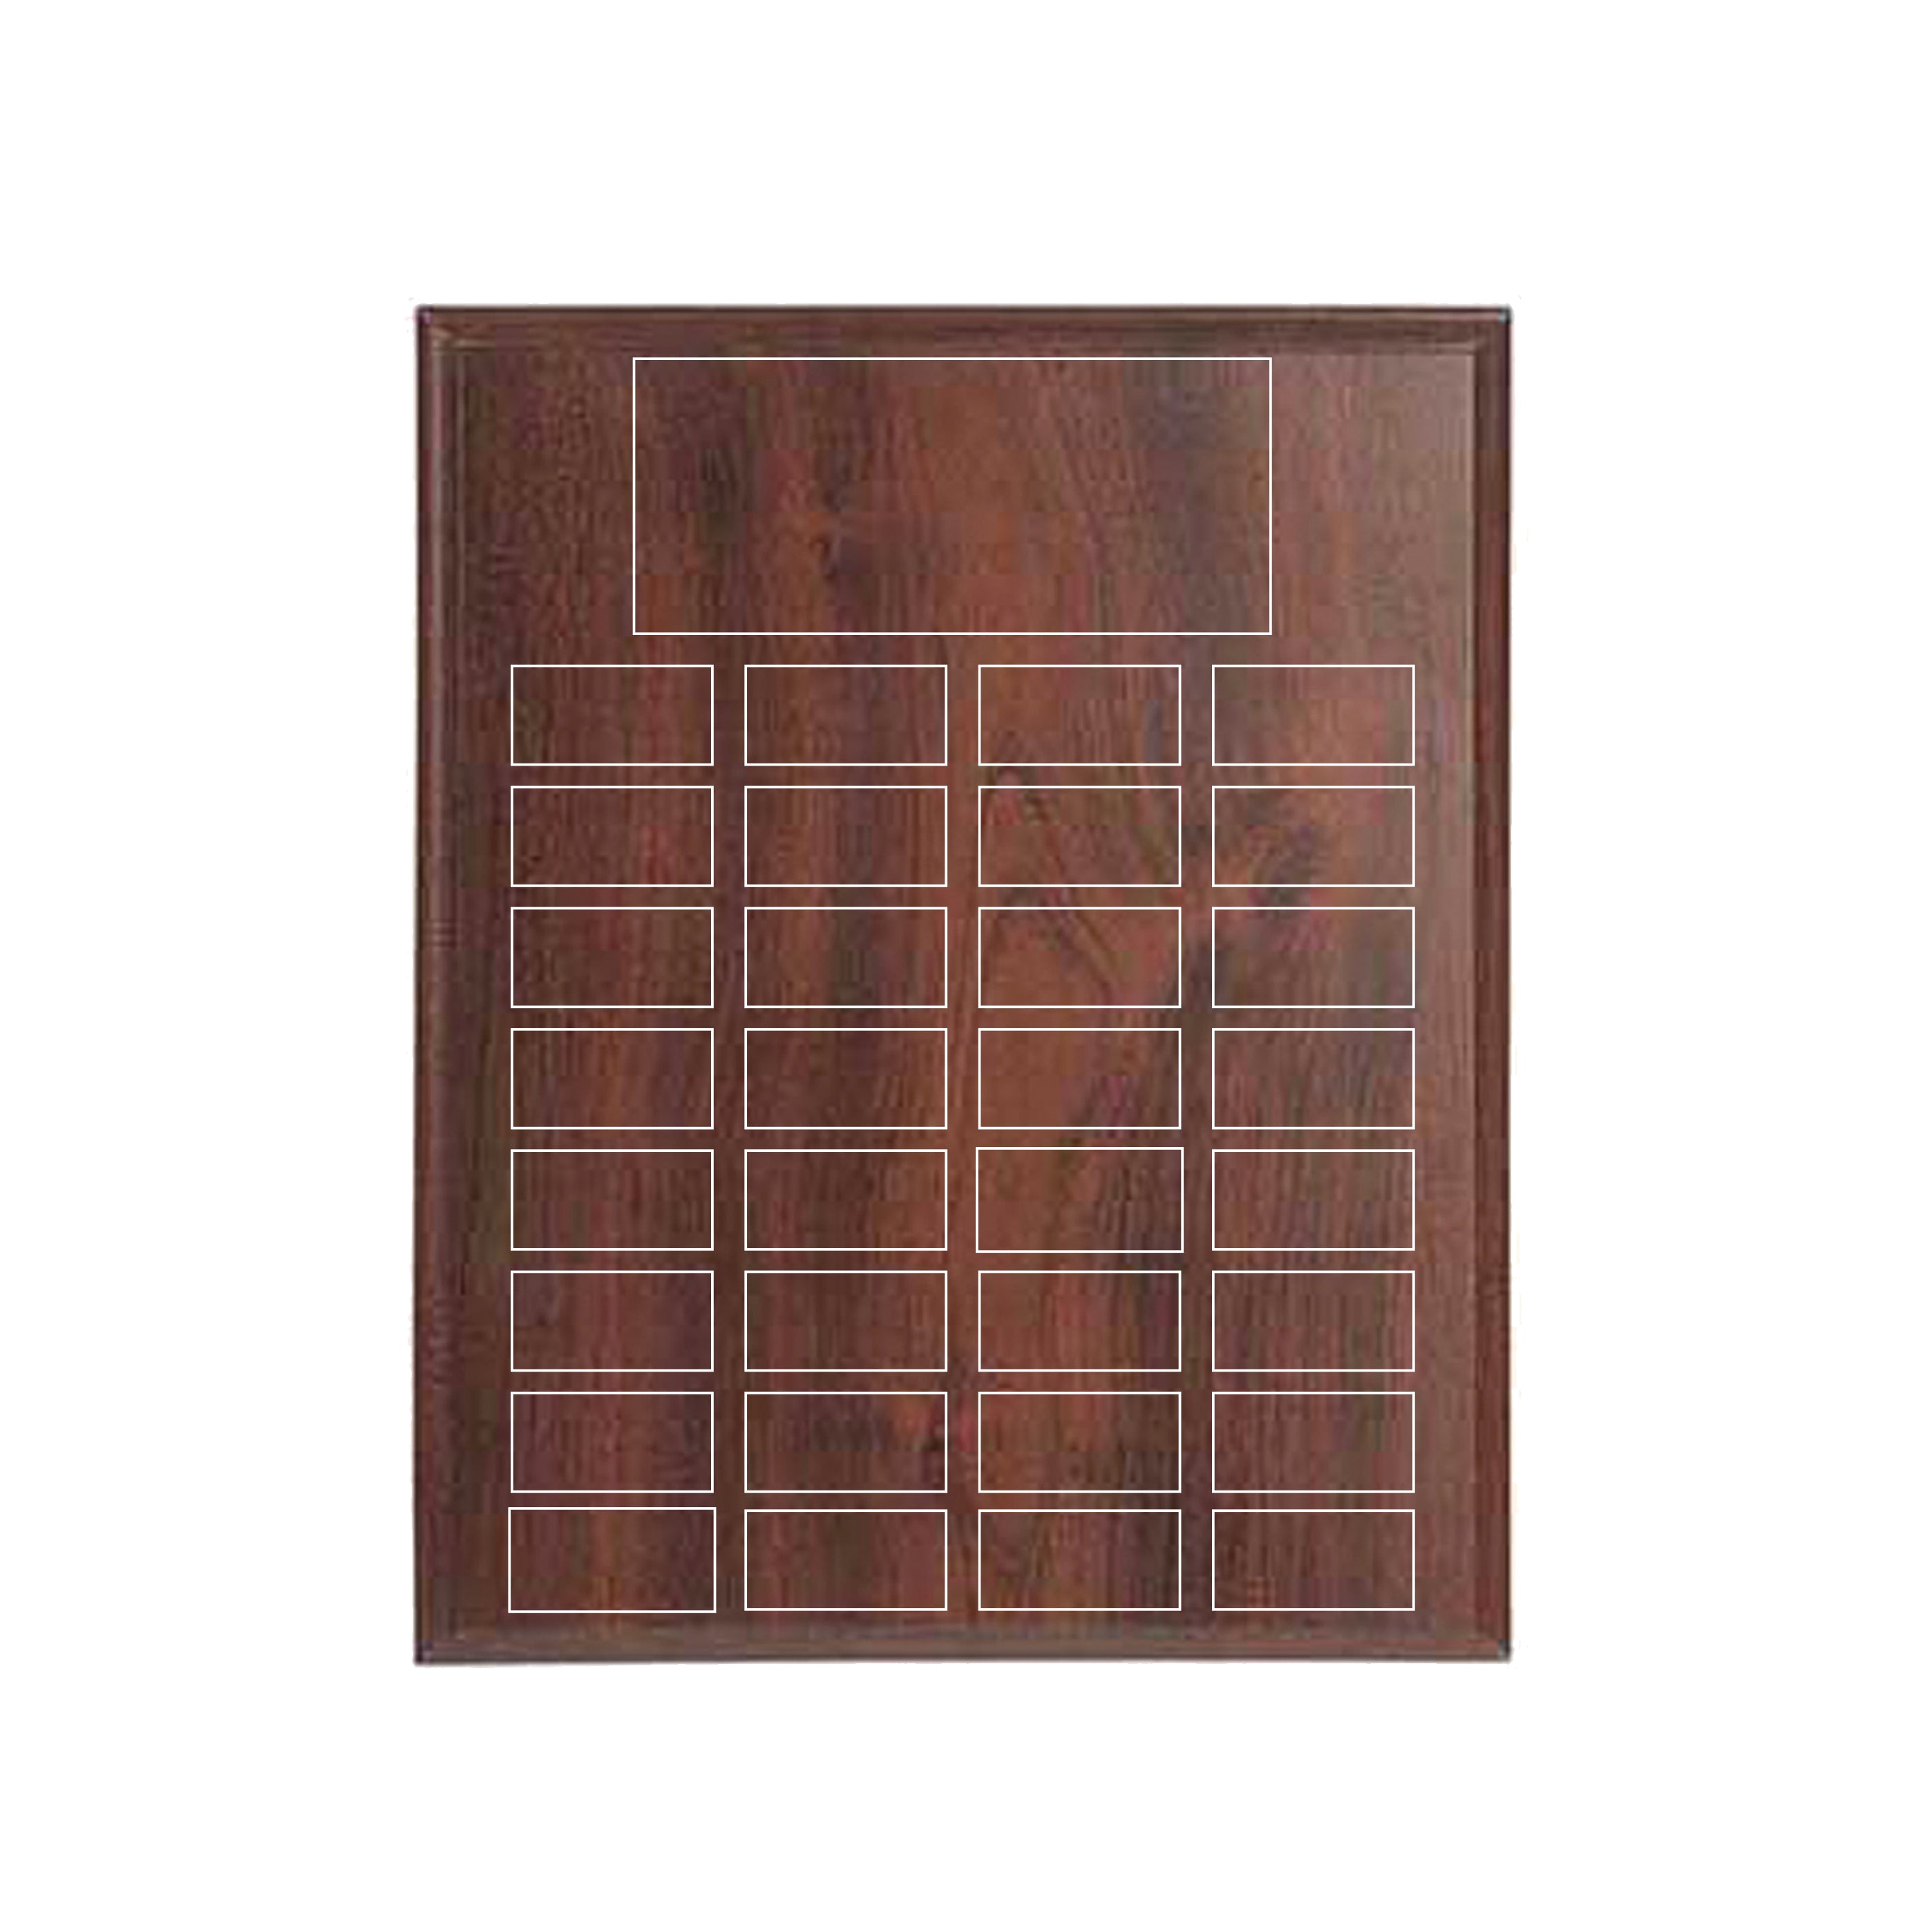 32 Plate Annual Award Plaque - Cherrywood Laminate 16" x 20" - Nothers